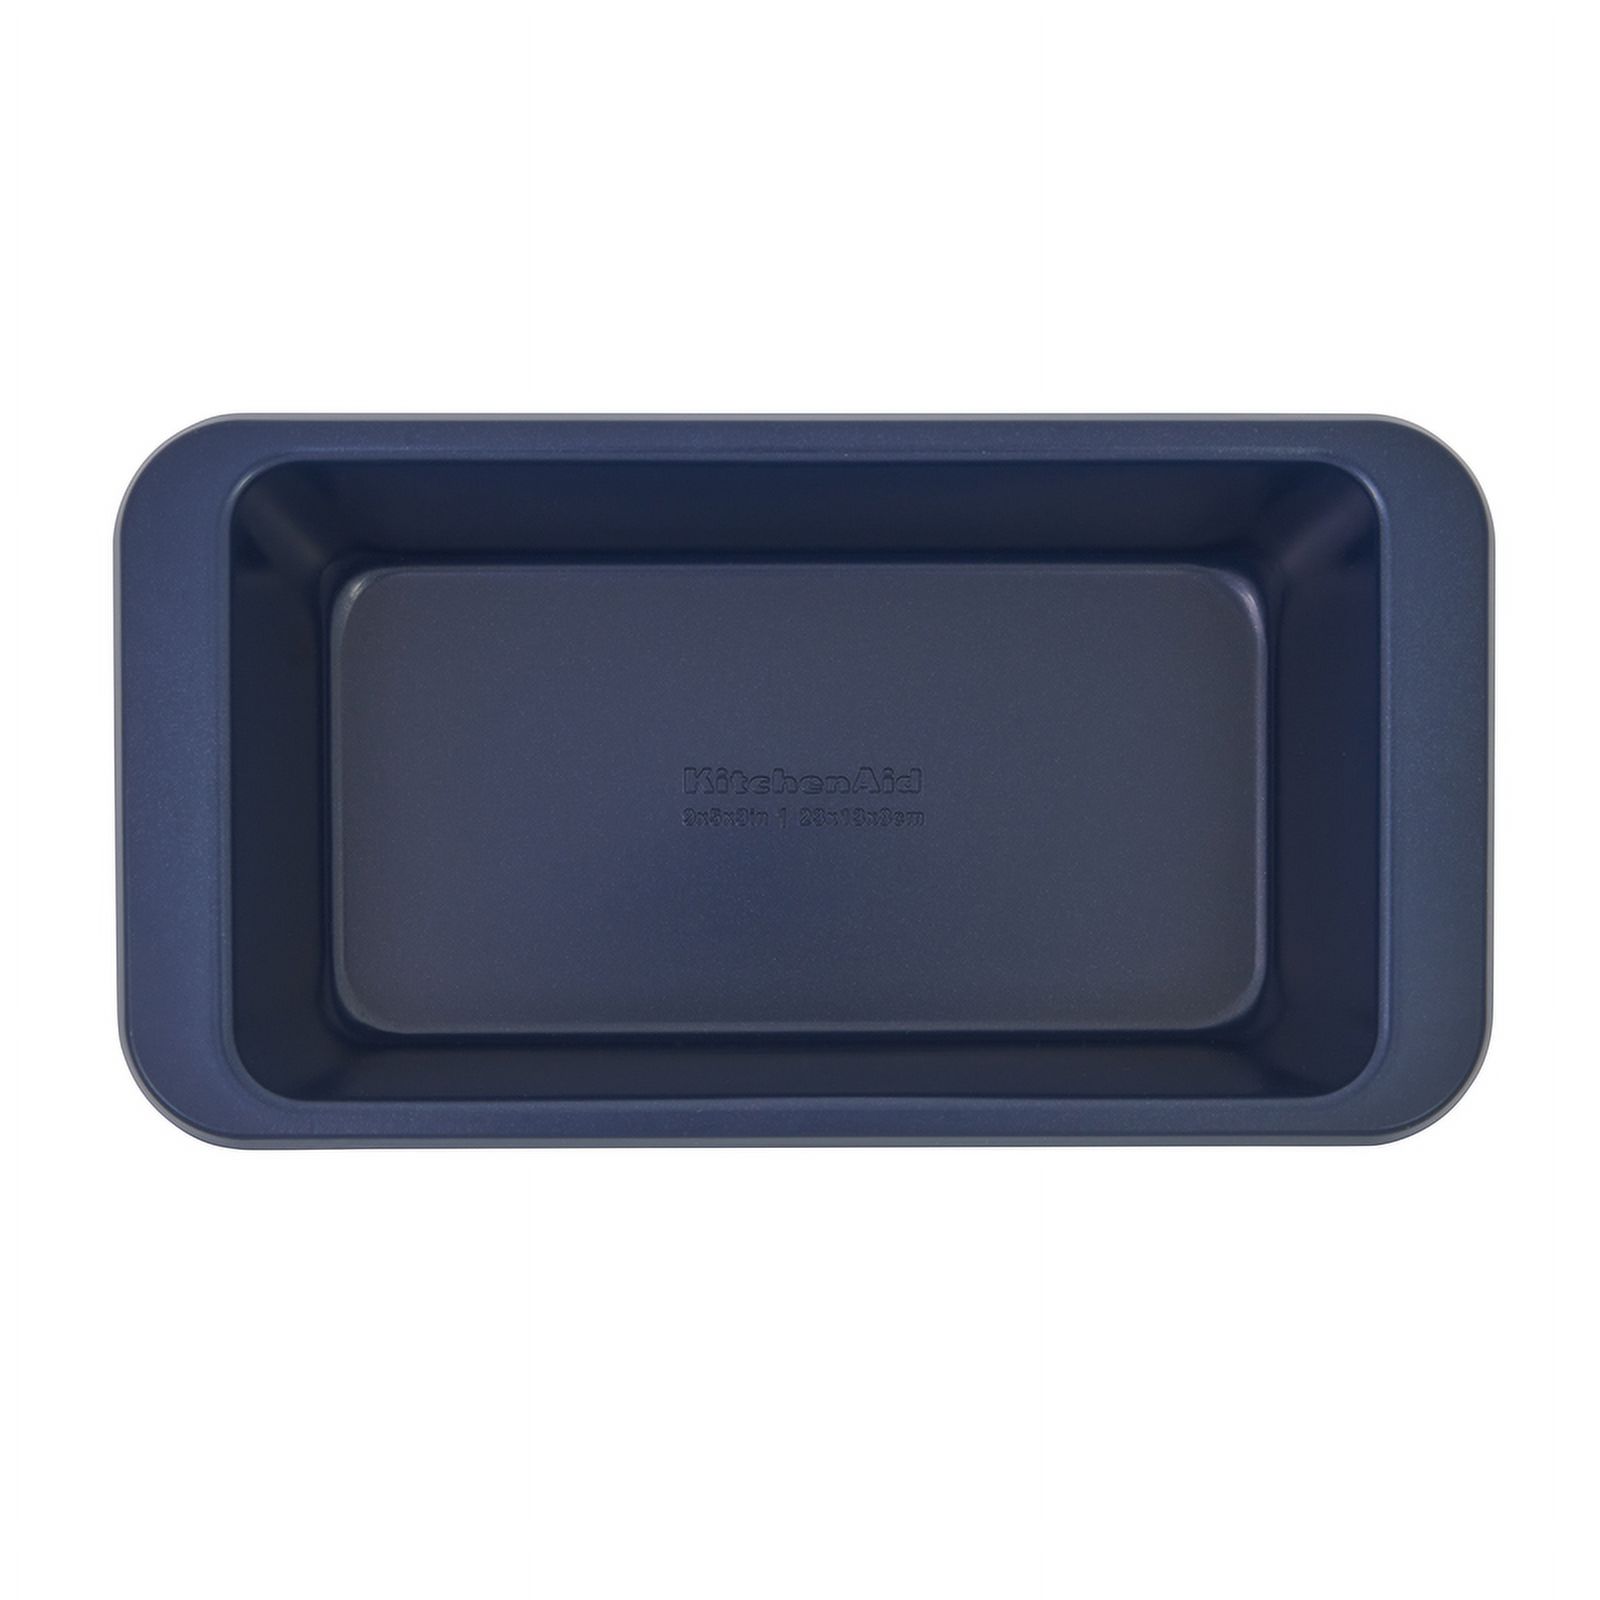 KitchenAid 0.6 Non-Stick Aluminized Steel 9X5 inch Loaf Pan Ink Blue - image 2 of 4